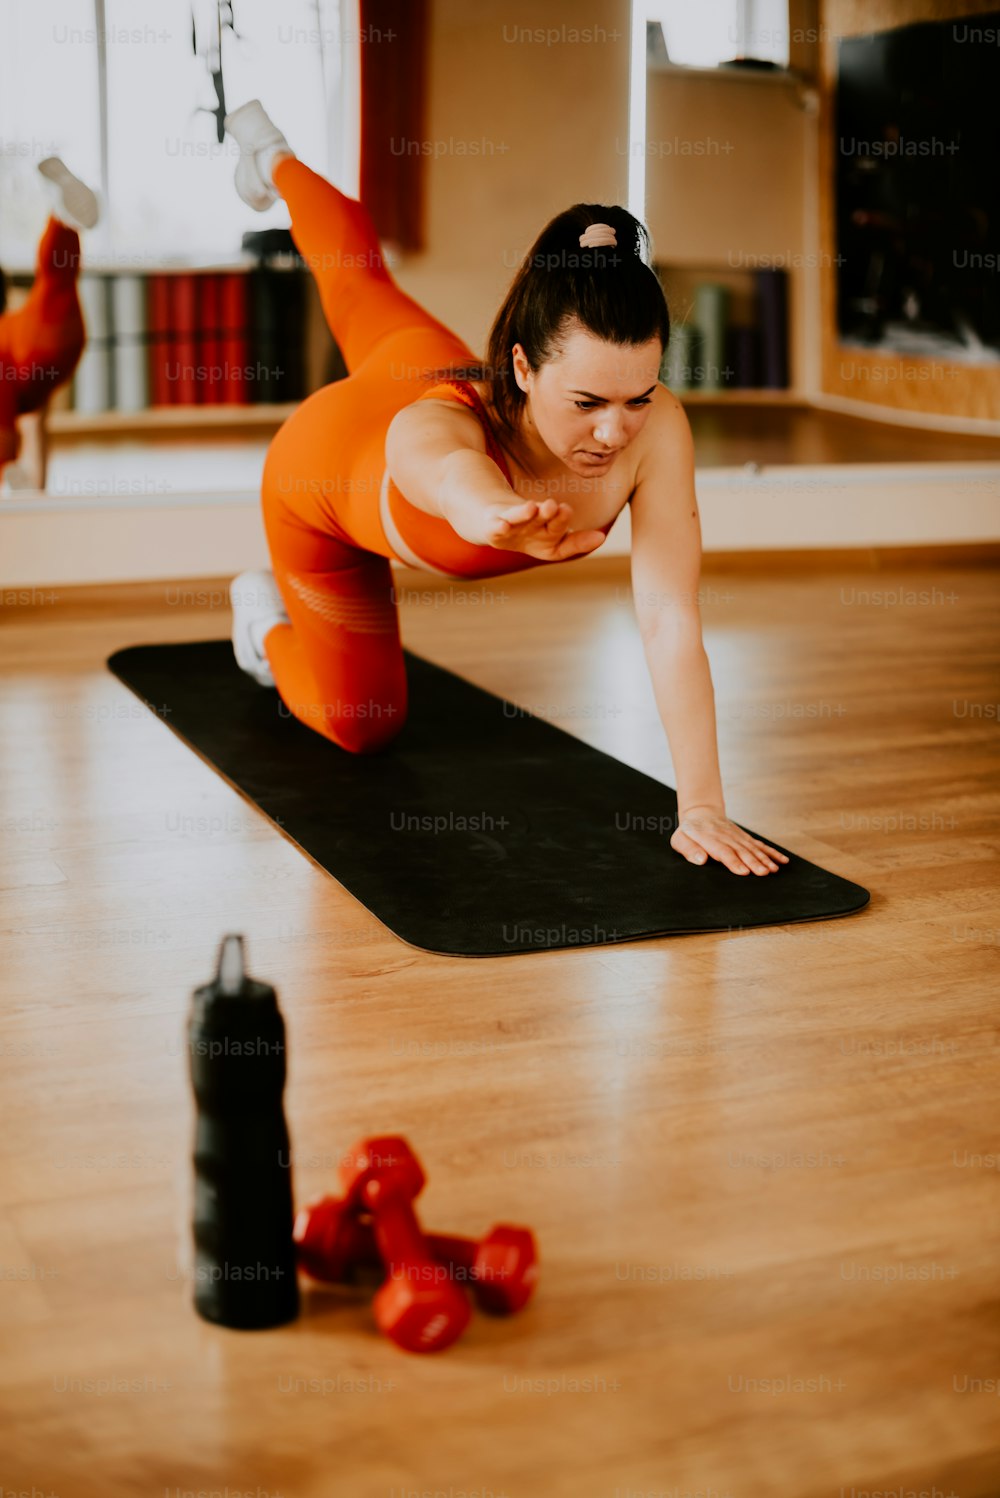 a woman in an orange outfit is doing a plank exercise